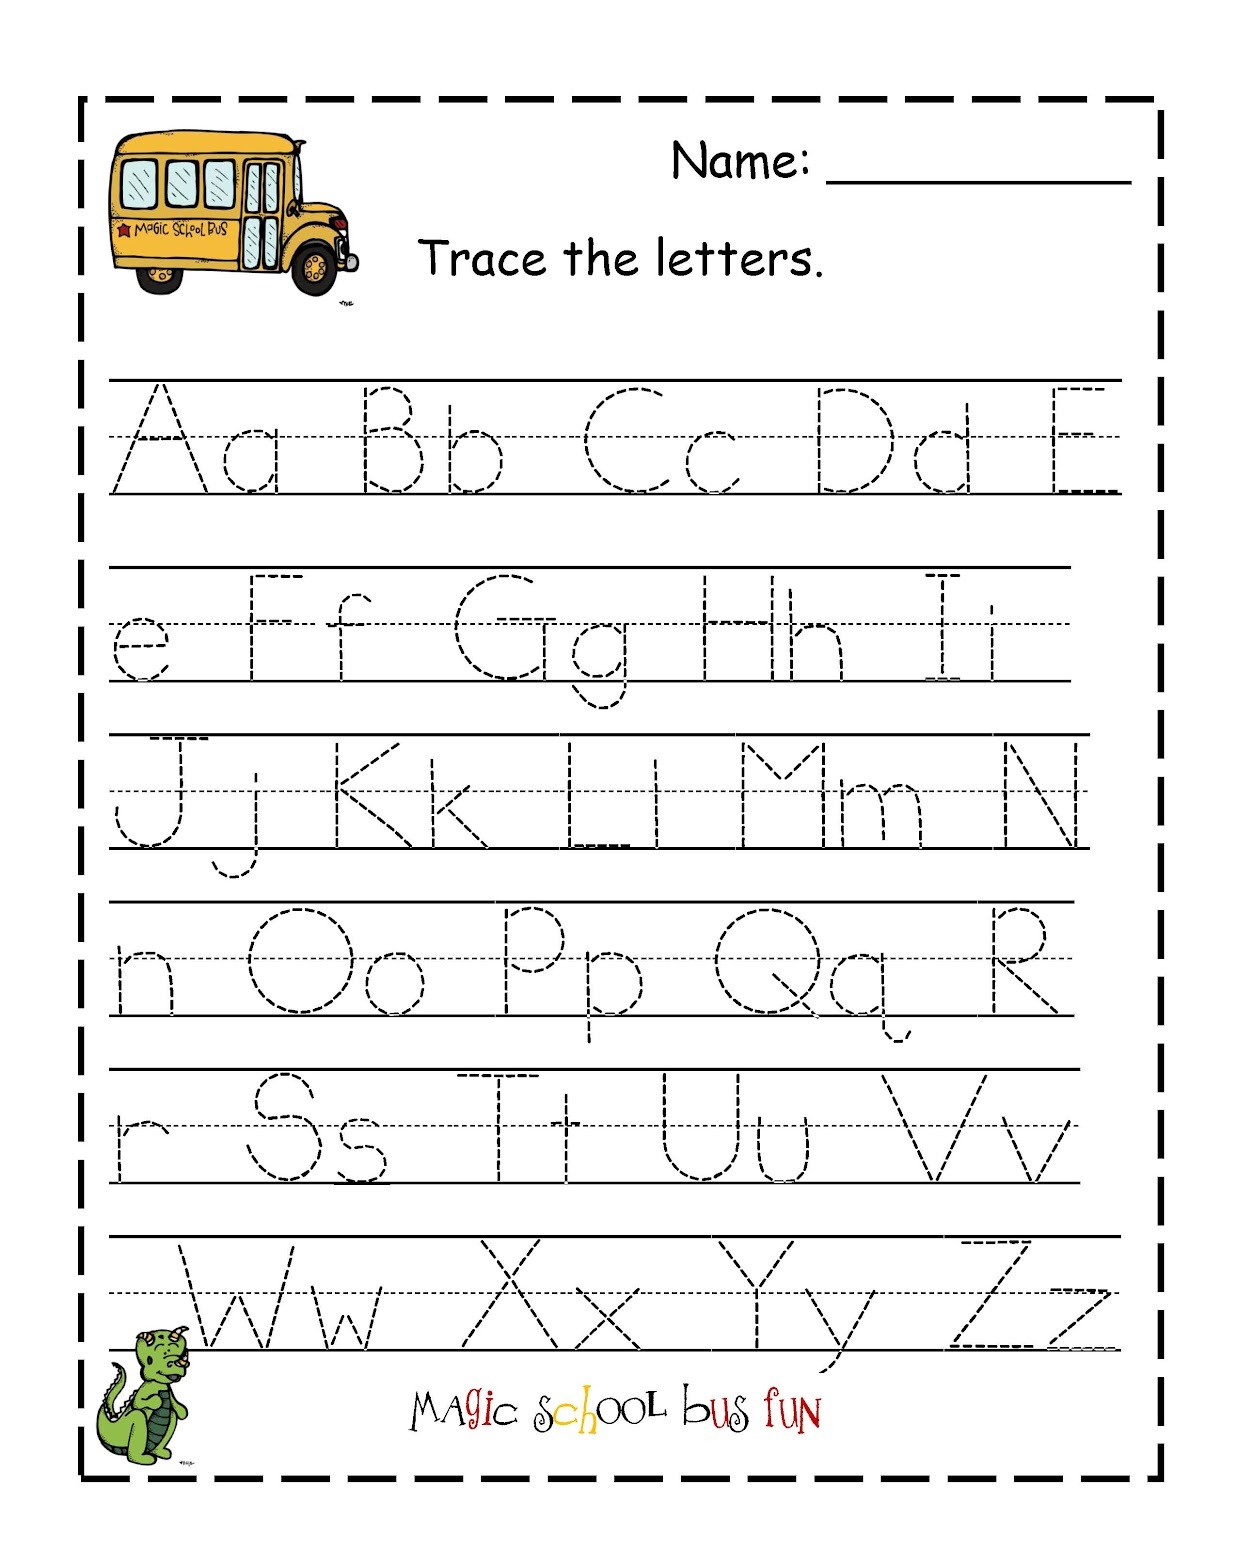 traceable-letter-worksheets-to-print-activity-shelter